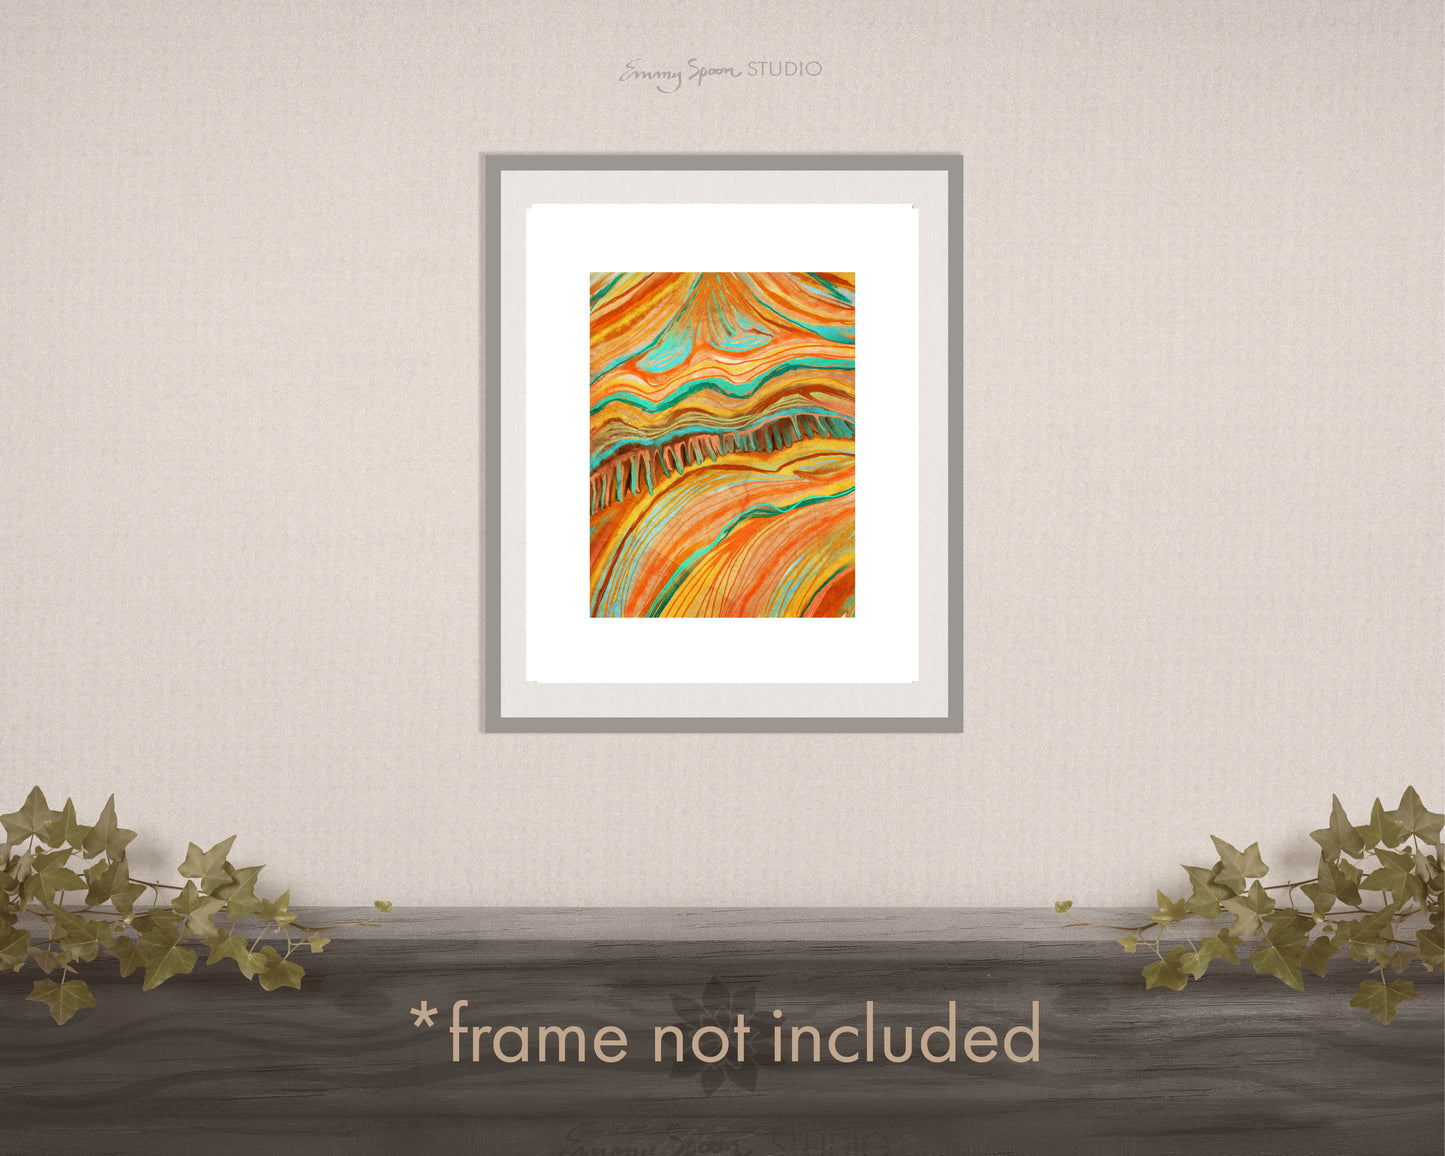 Lustre Art Print Summer Vibes (2022) by Emmy Spoon Studio 11x14 Lustre Professional Print - frame not included